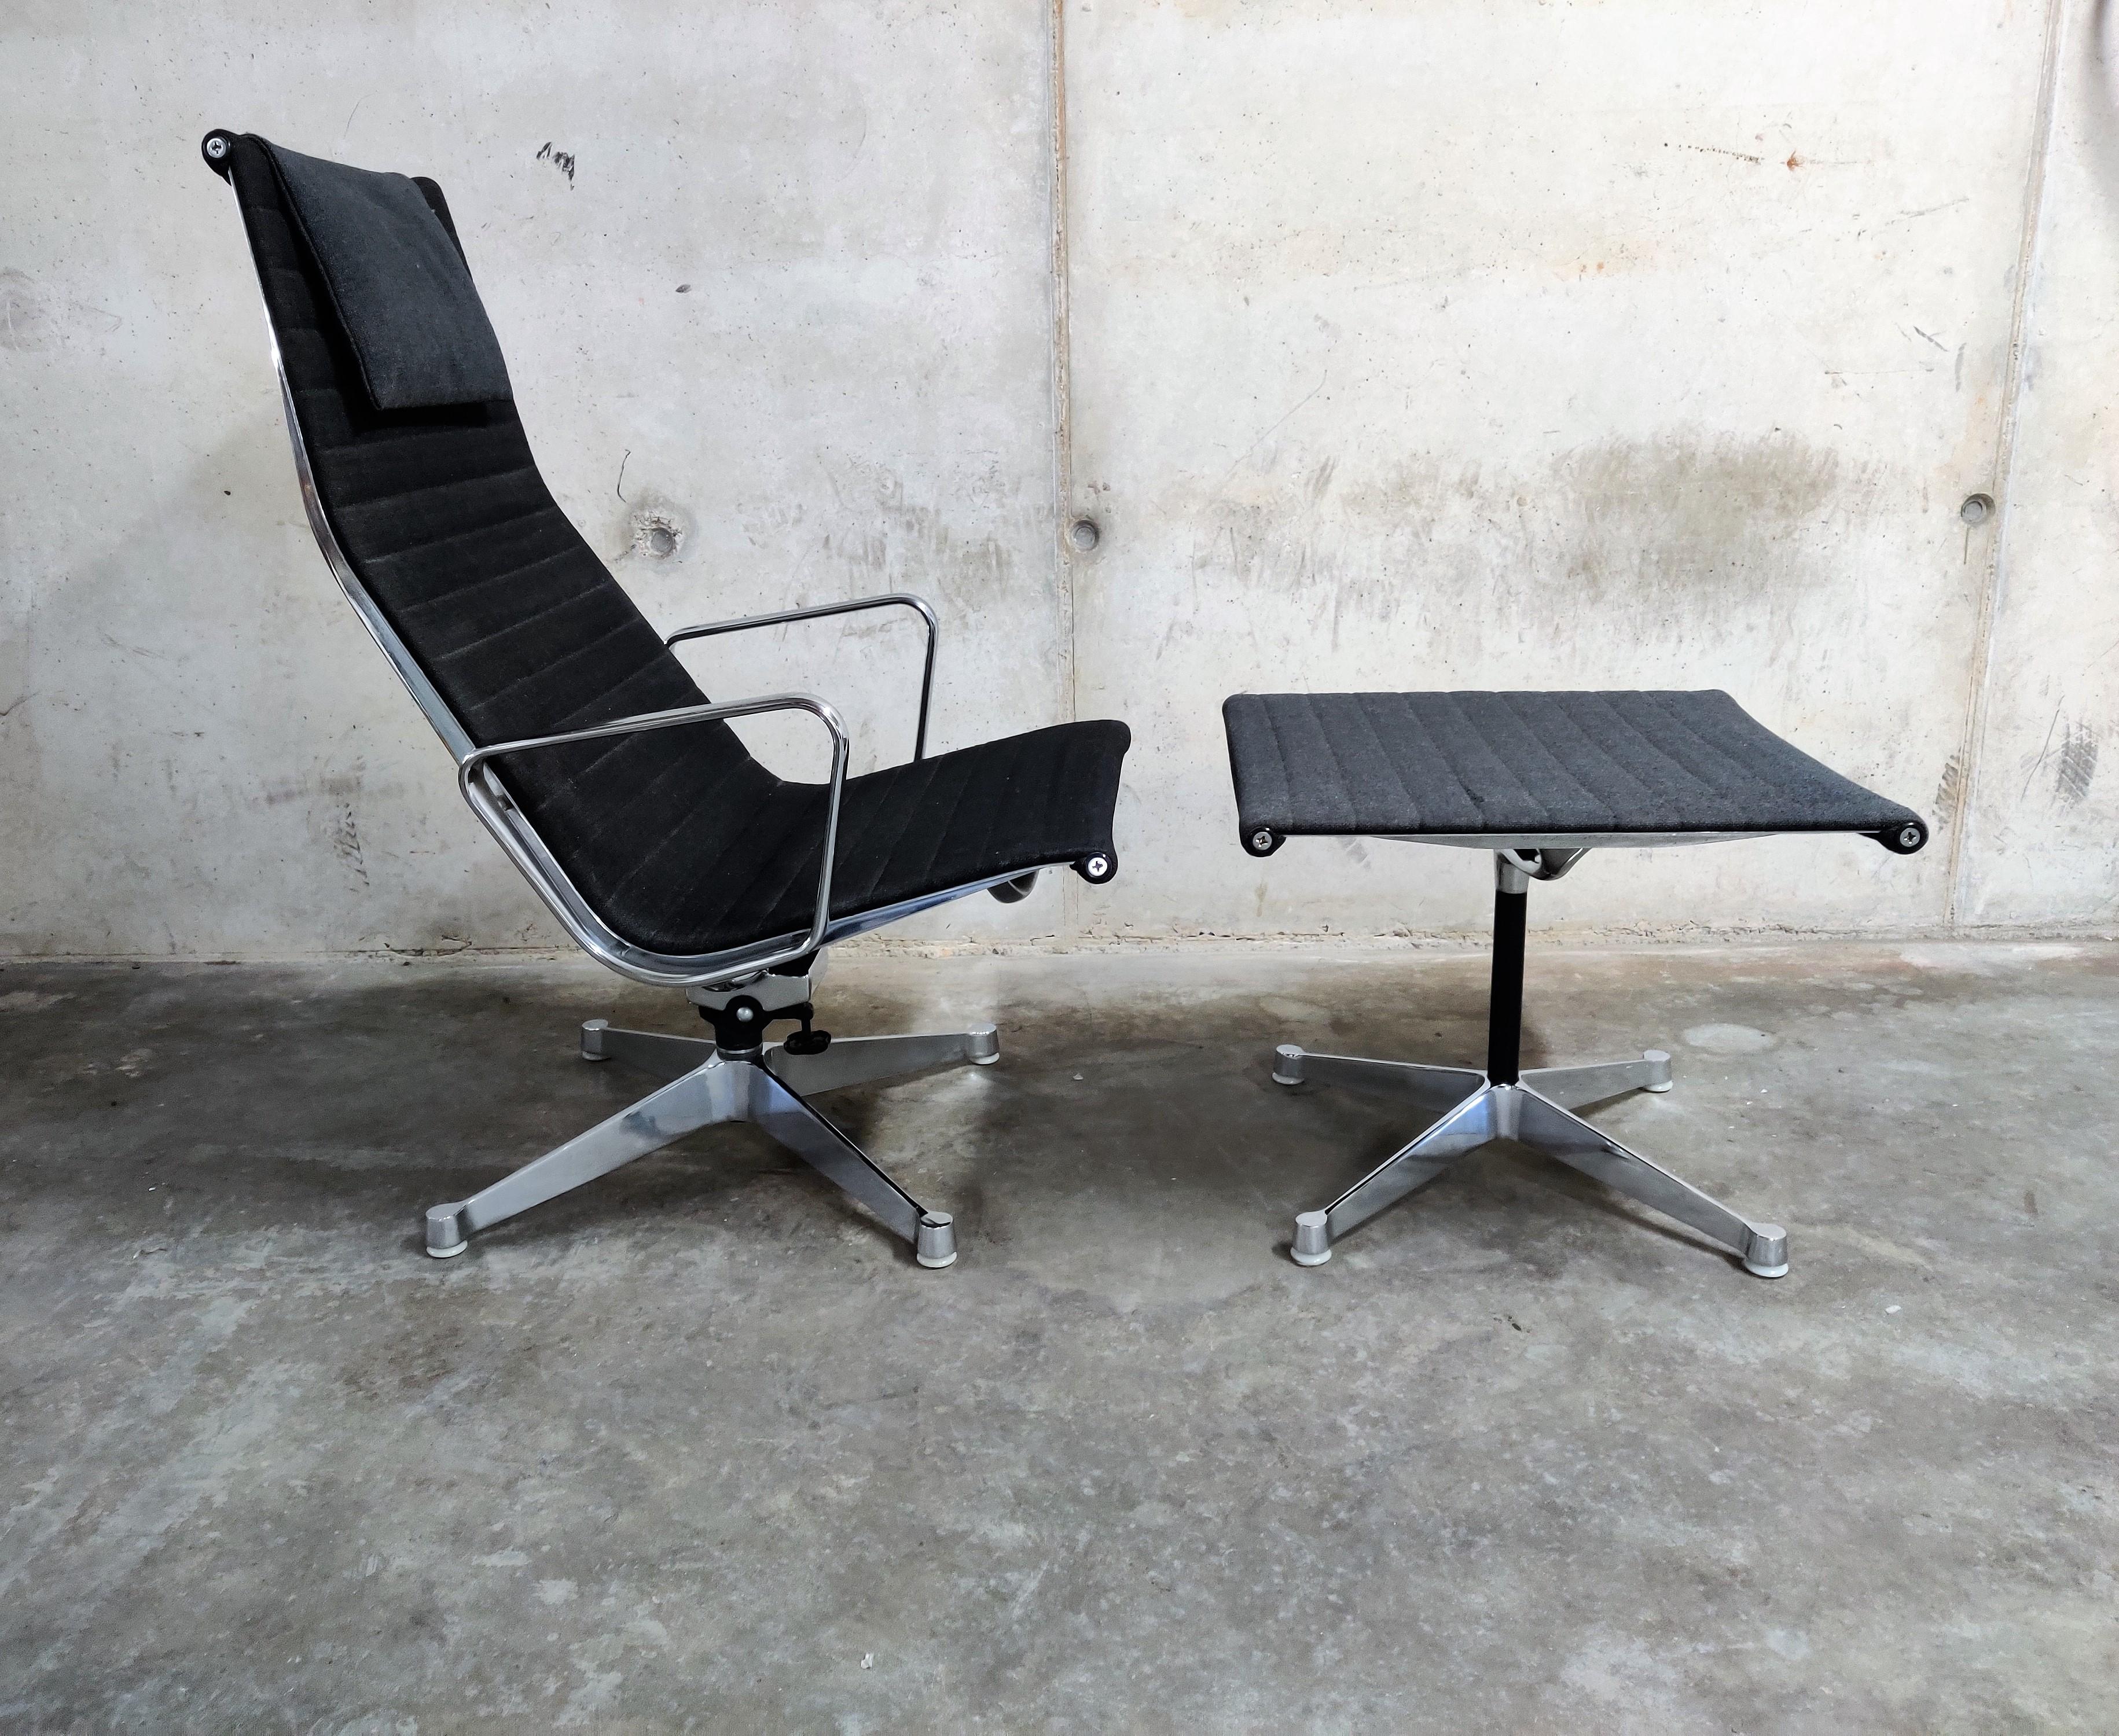 Elegant and timeless Eames EA124 swivel chair with matching EA125 ottoman.

The set is upholstered in the original black fabric.

The chair has a tilt mechanism for maximum comfort.

Good condition, only minor wear on one of the armrests and a